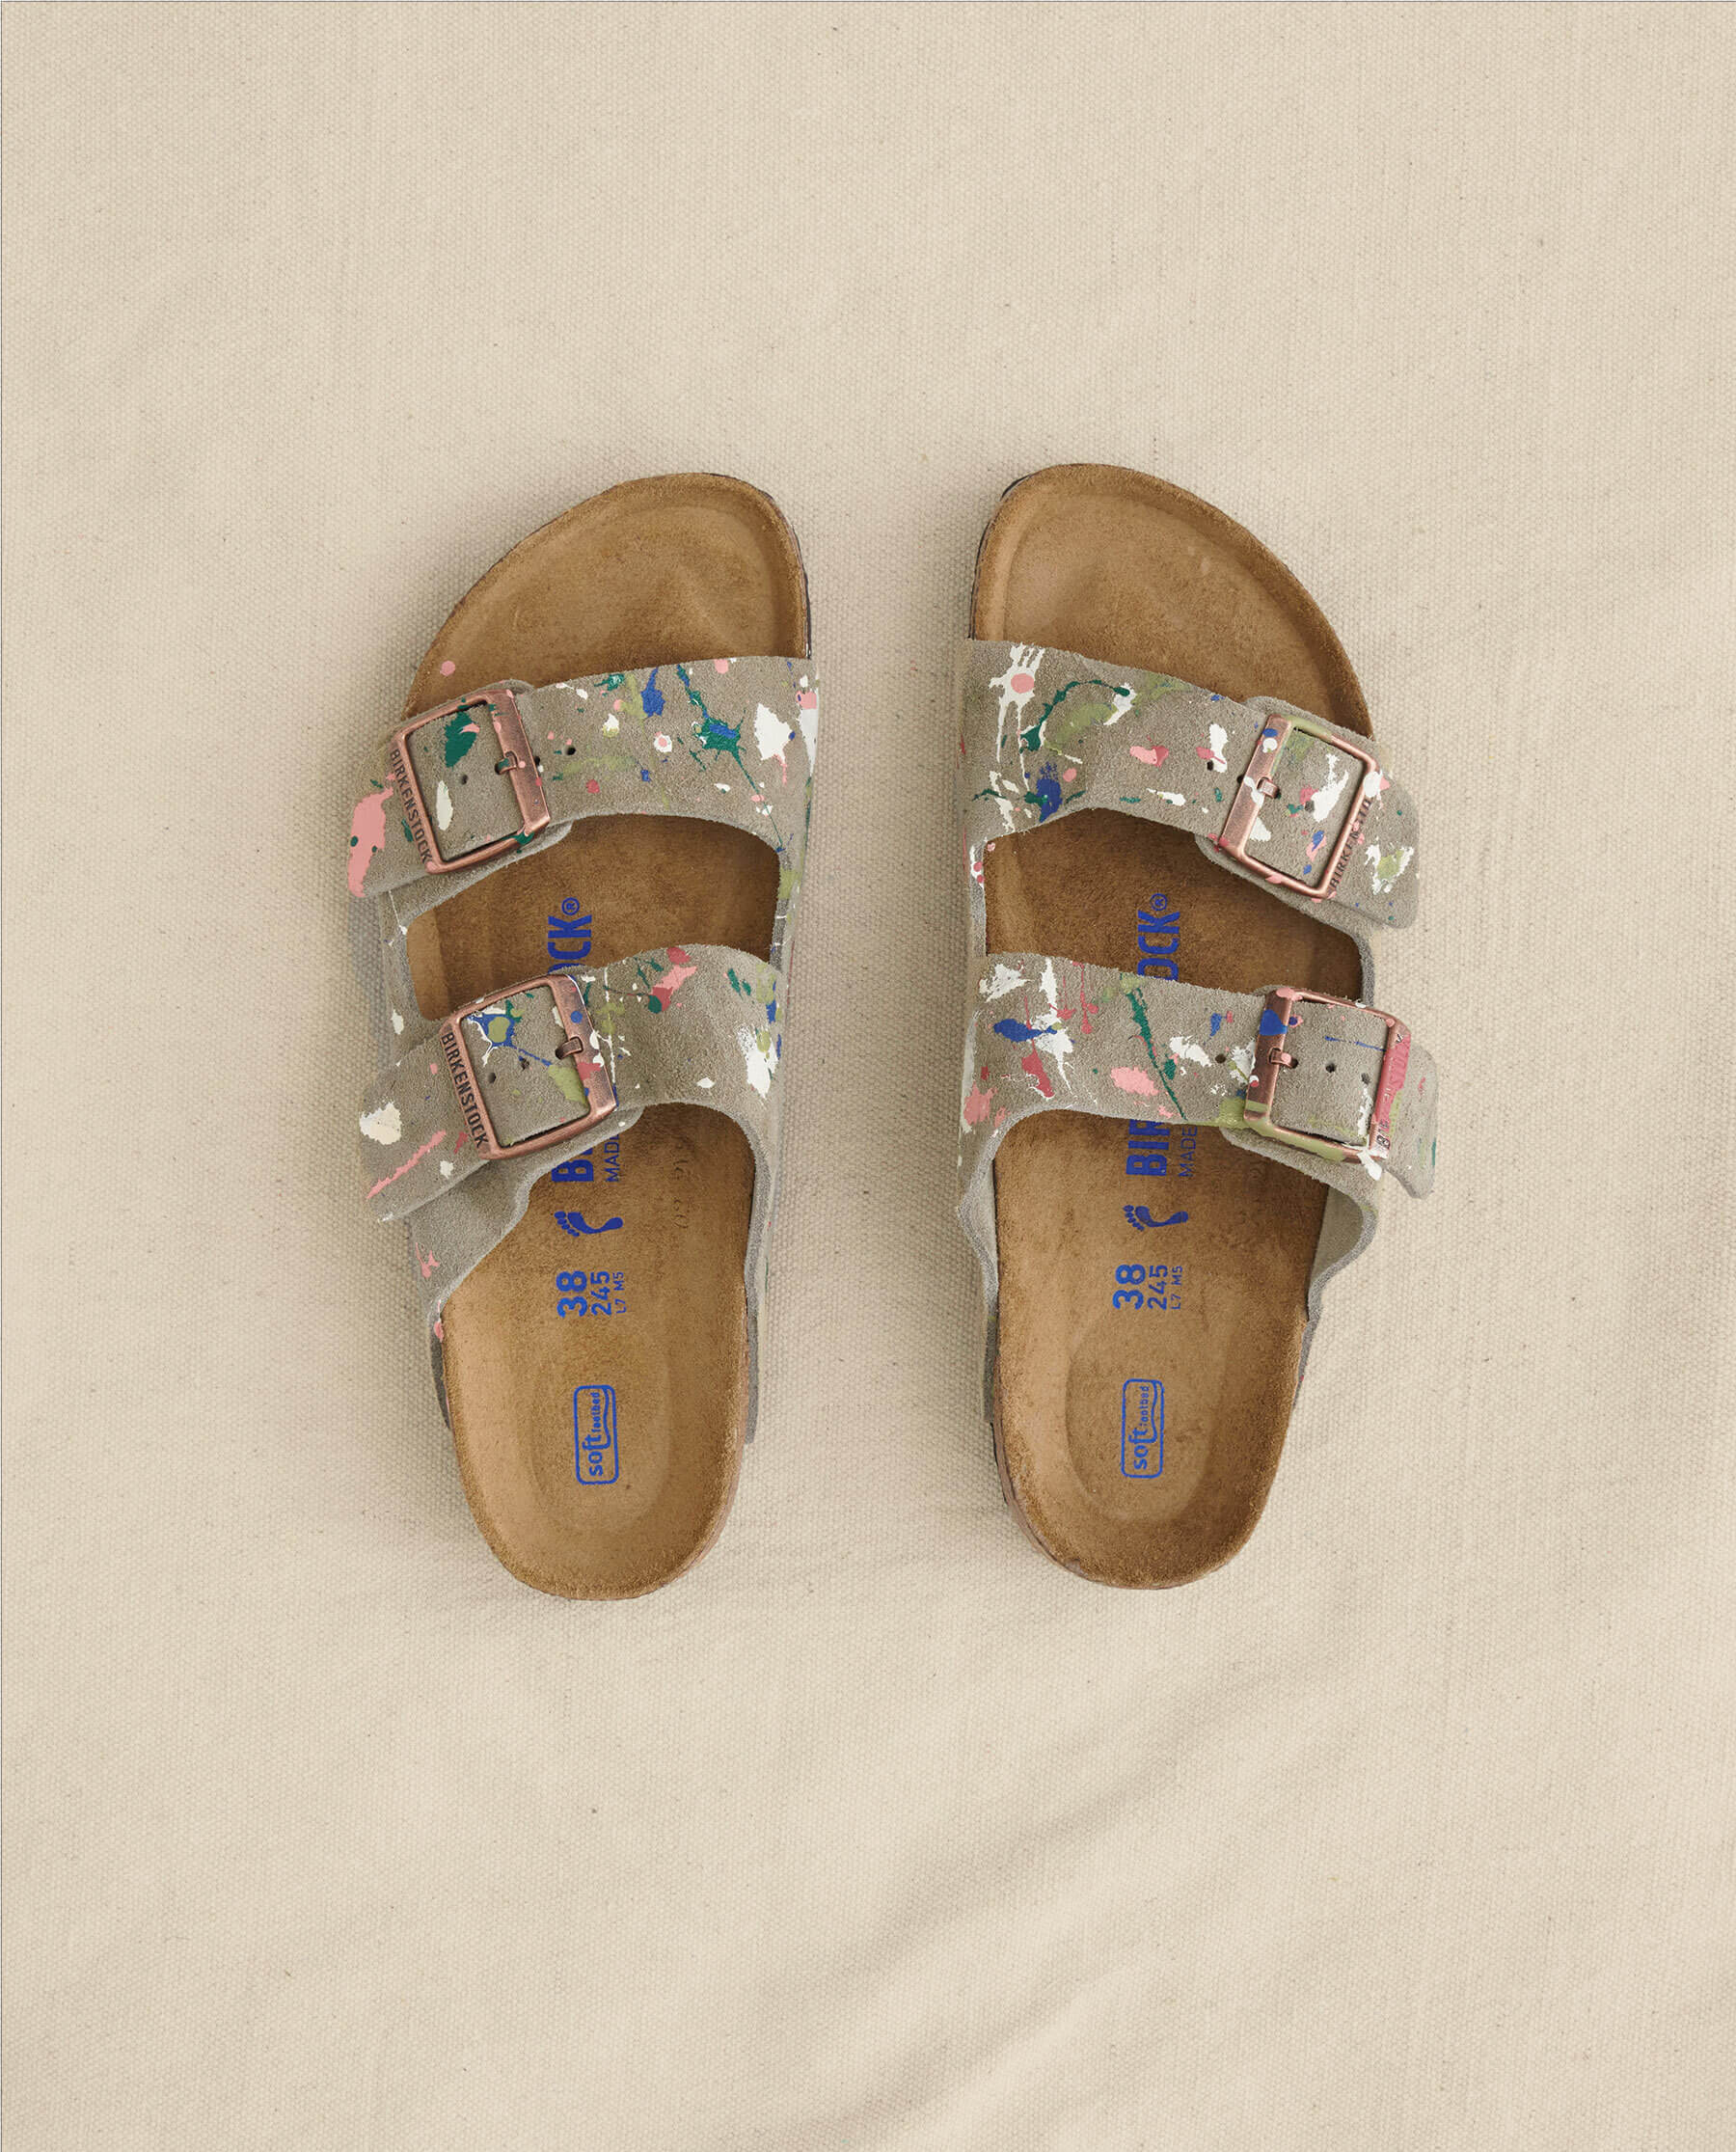 Arizona Taupe Birkenstock with Paint. -- Taupe with Bright Multi Paint SHOE THE GREAT. HOL 23 BIRKENSTOCK